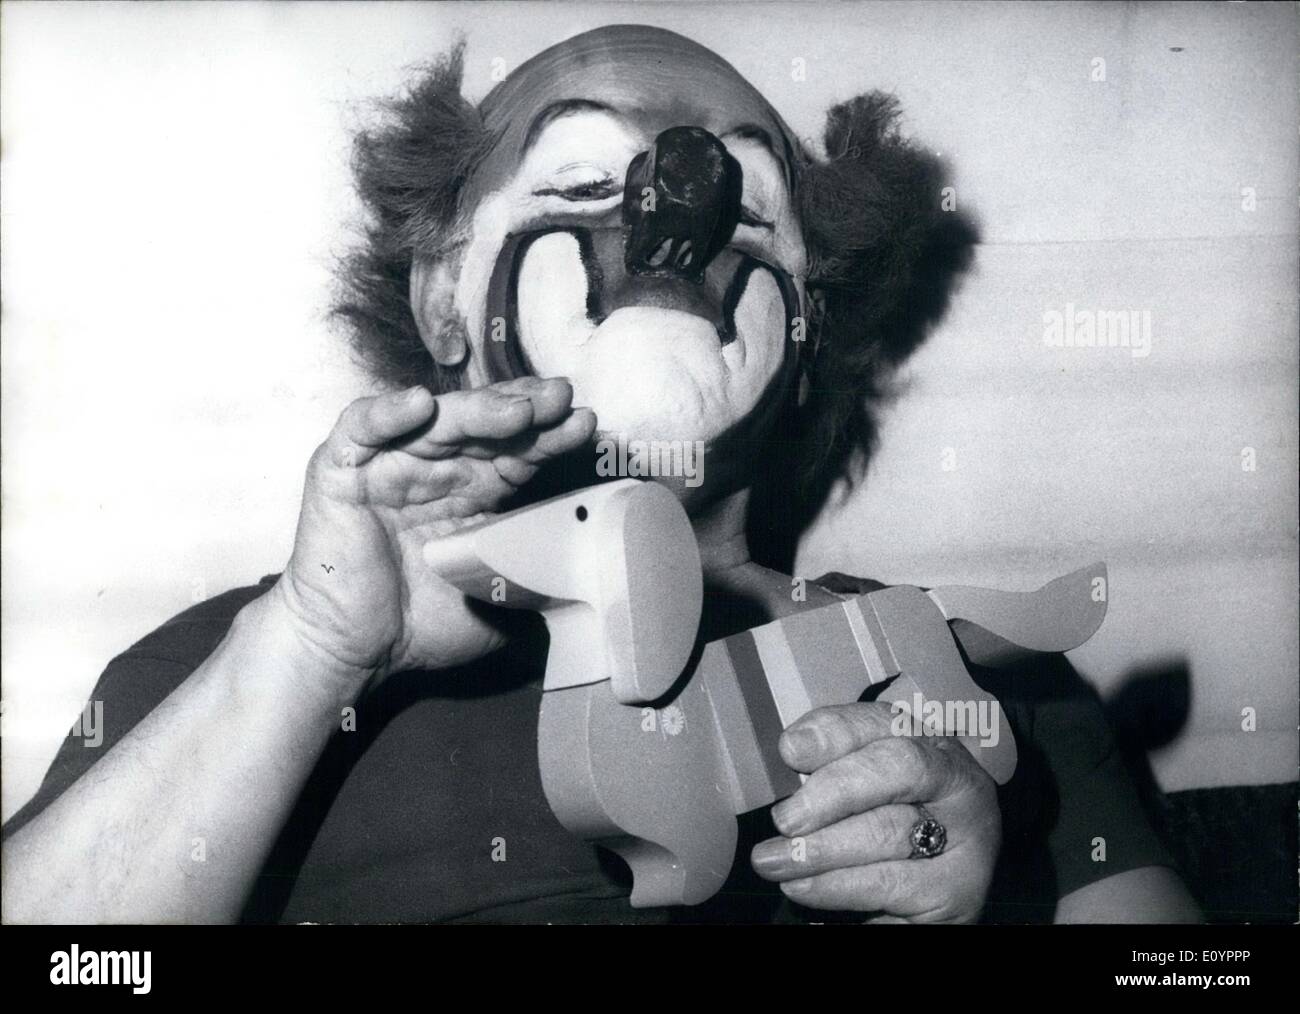 Mar. 03, 1971 - Charlie Rivel with Olympic badger-dog: Charlie Rivel, the famous clown was quite enchanted when he saw the Olympic badger-dog WALDI for the first time (photo). WALDI, who will be put on the market in a few weeks, will be available in wood, plastic and textile in different sizes and one hopes that WALDI will succeed in making some money for the Olympiad Stock Photo